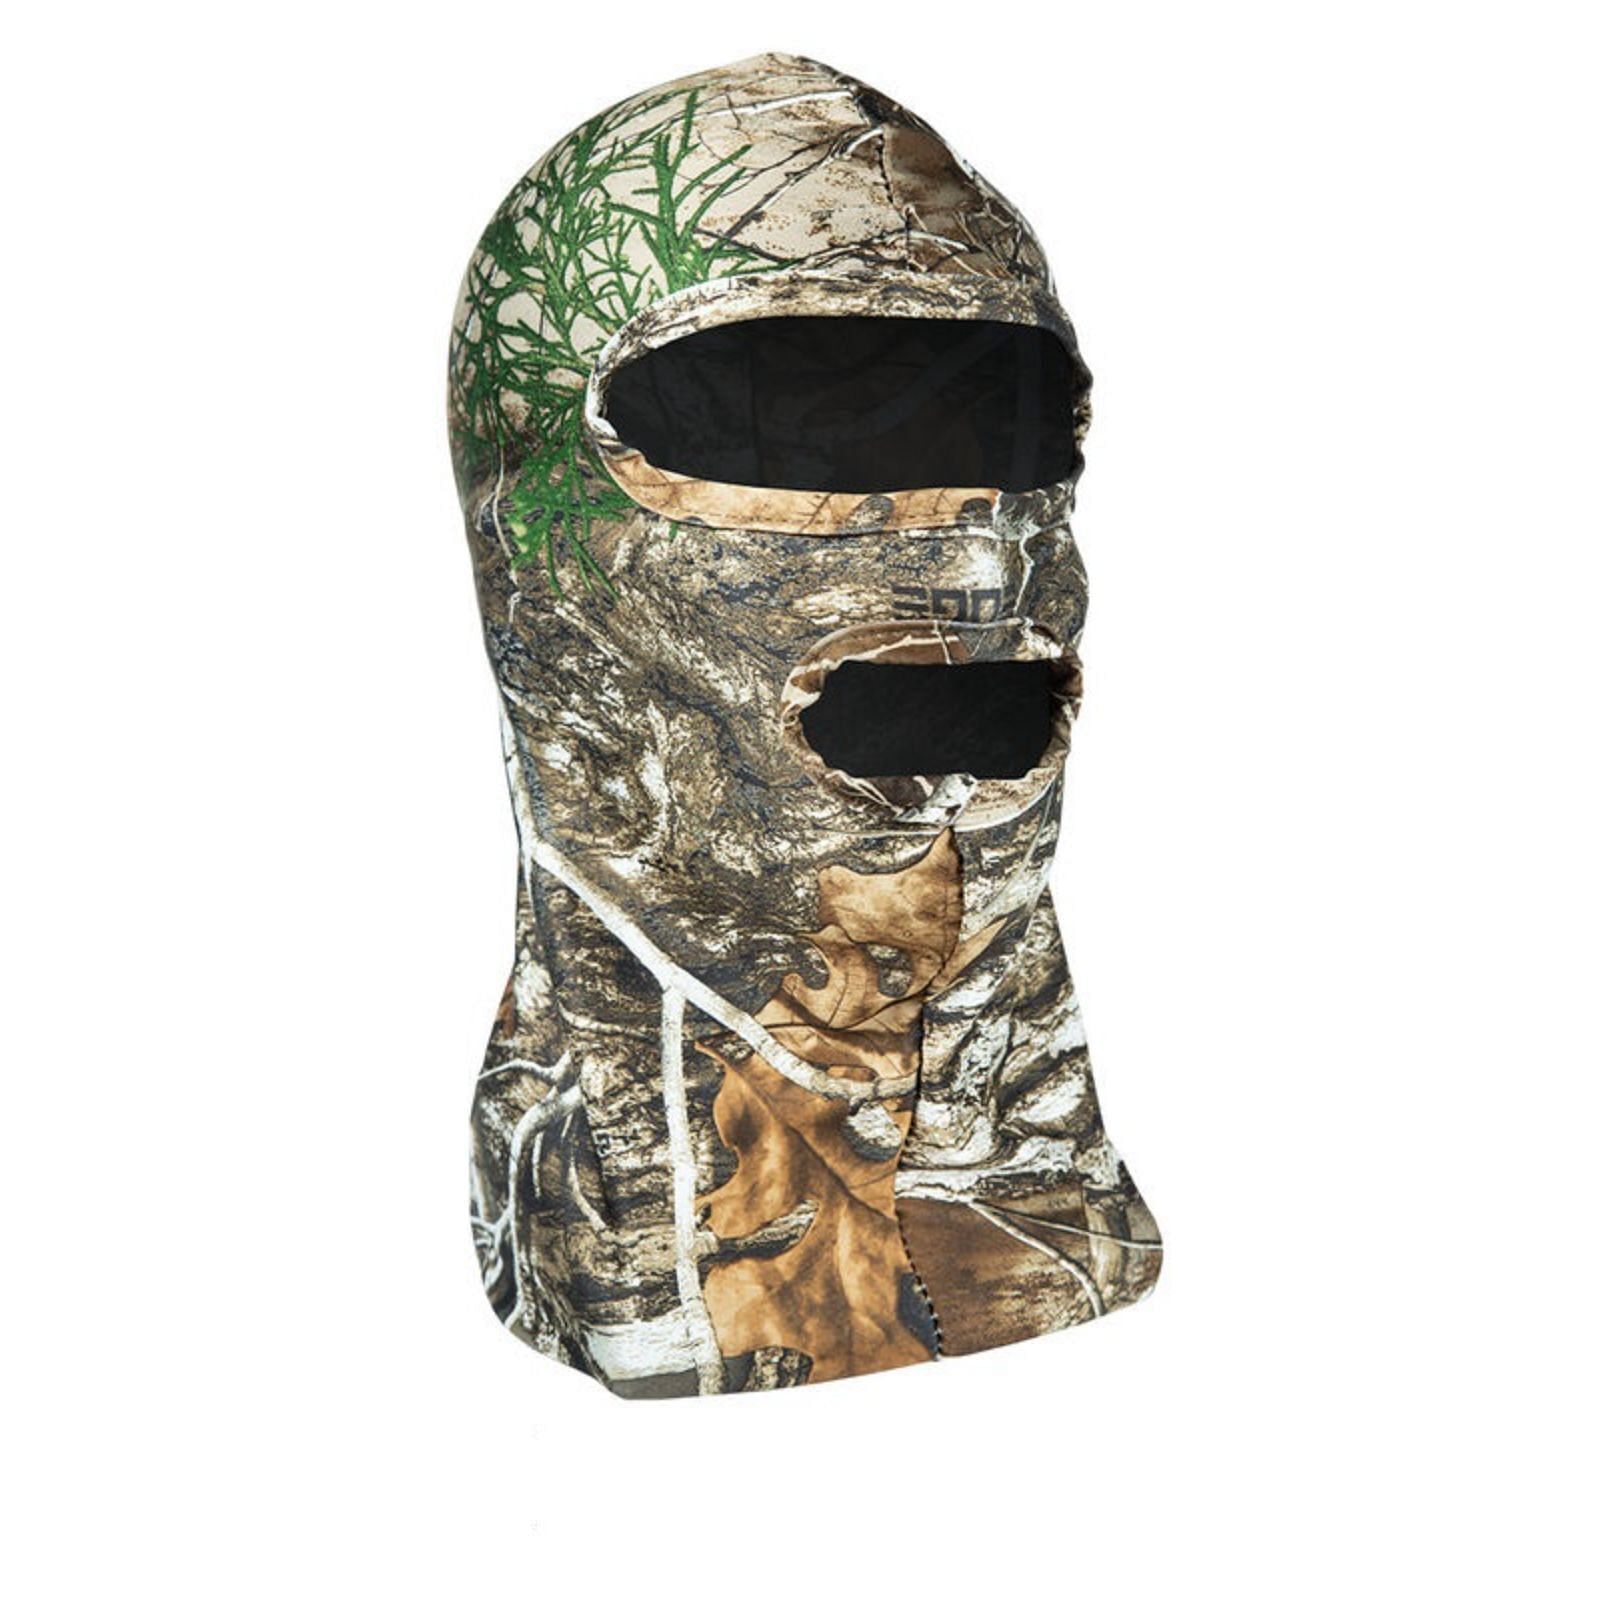 Primos Stretch-Fit Face Mask Realtree Edge Camo